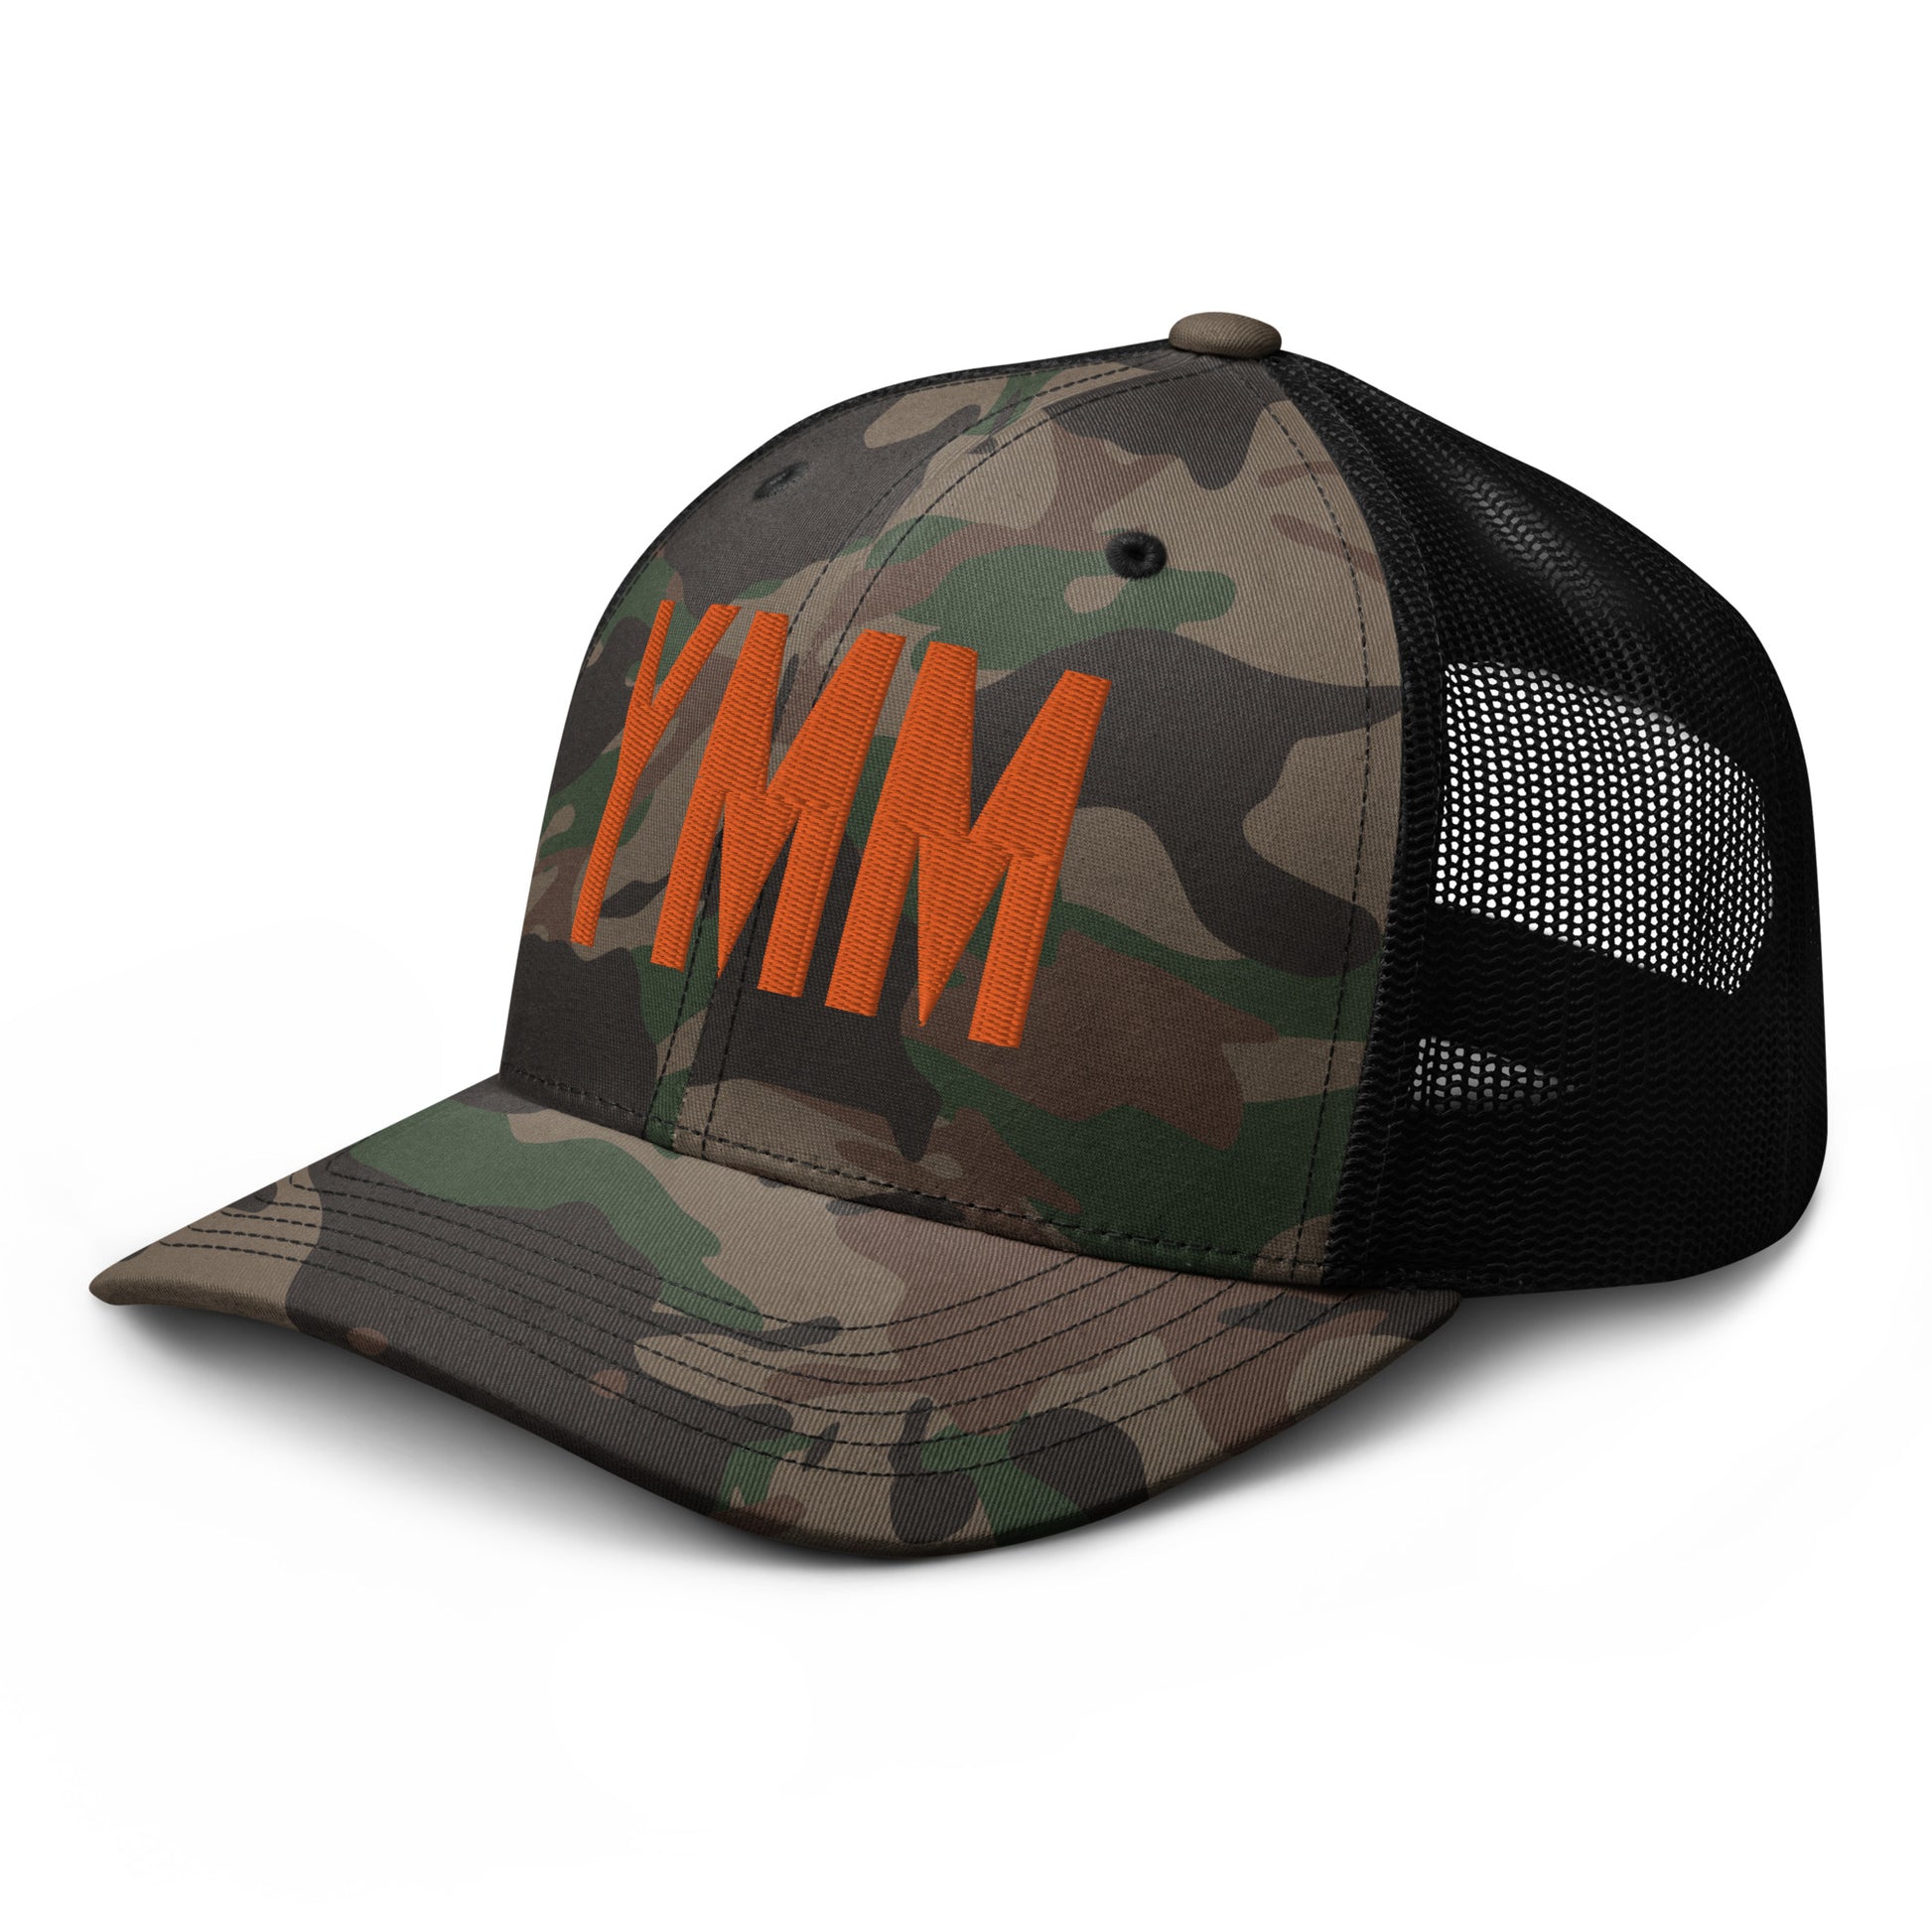 Airport Code Camouflage Trucker Hat - Orange • YMM Fort McMurray • YHM Designs - Image 01